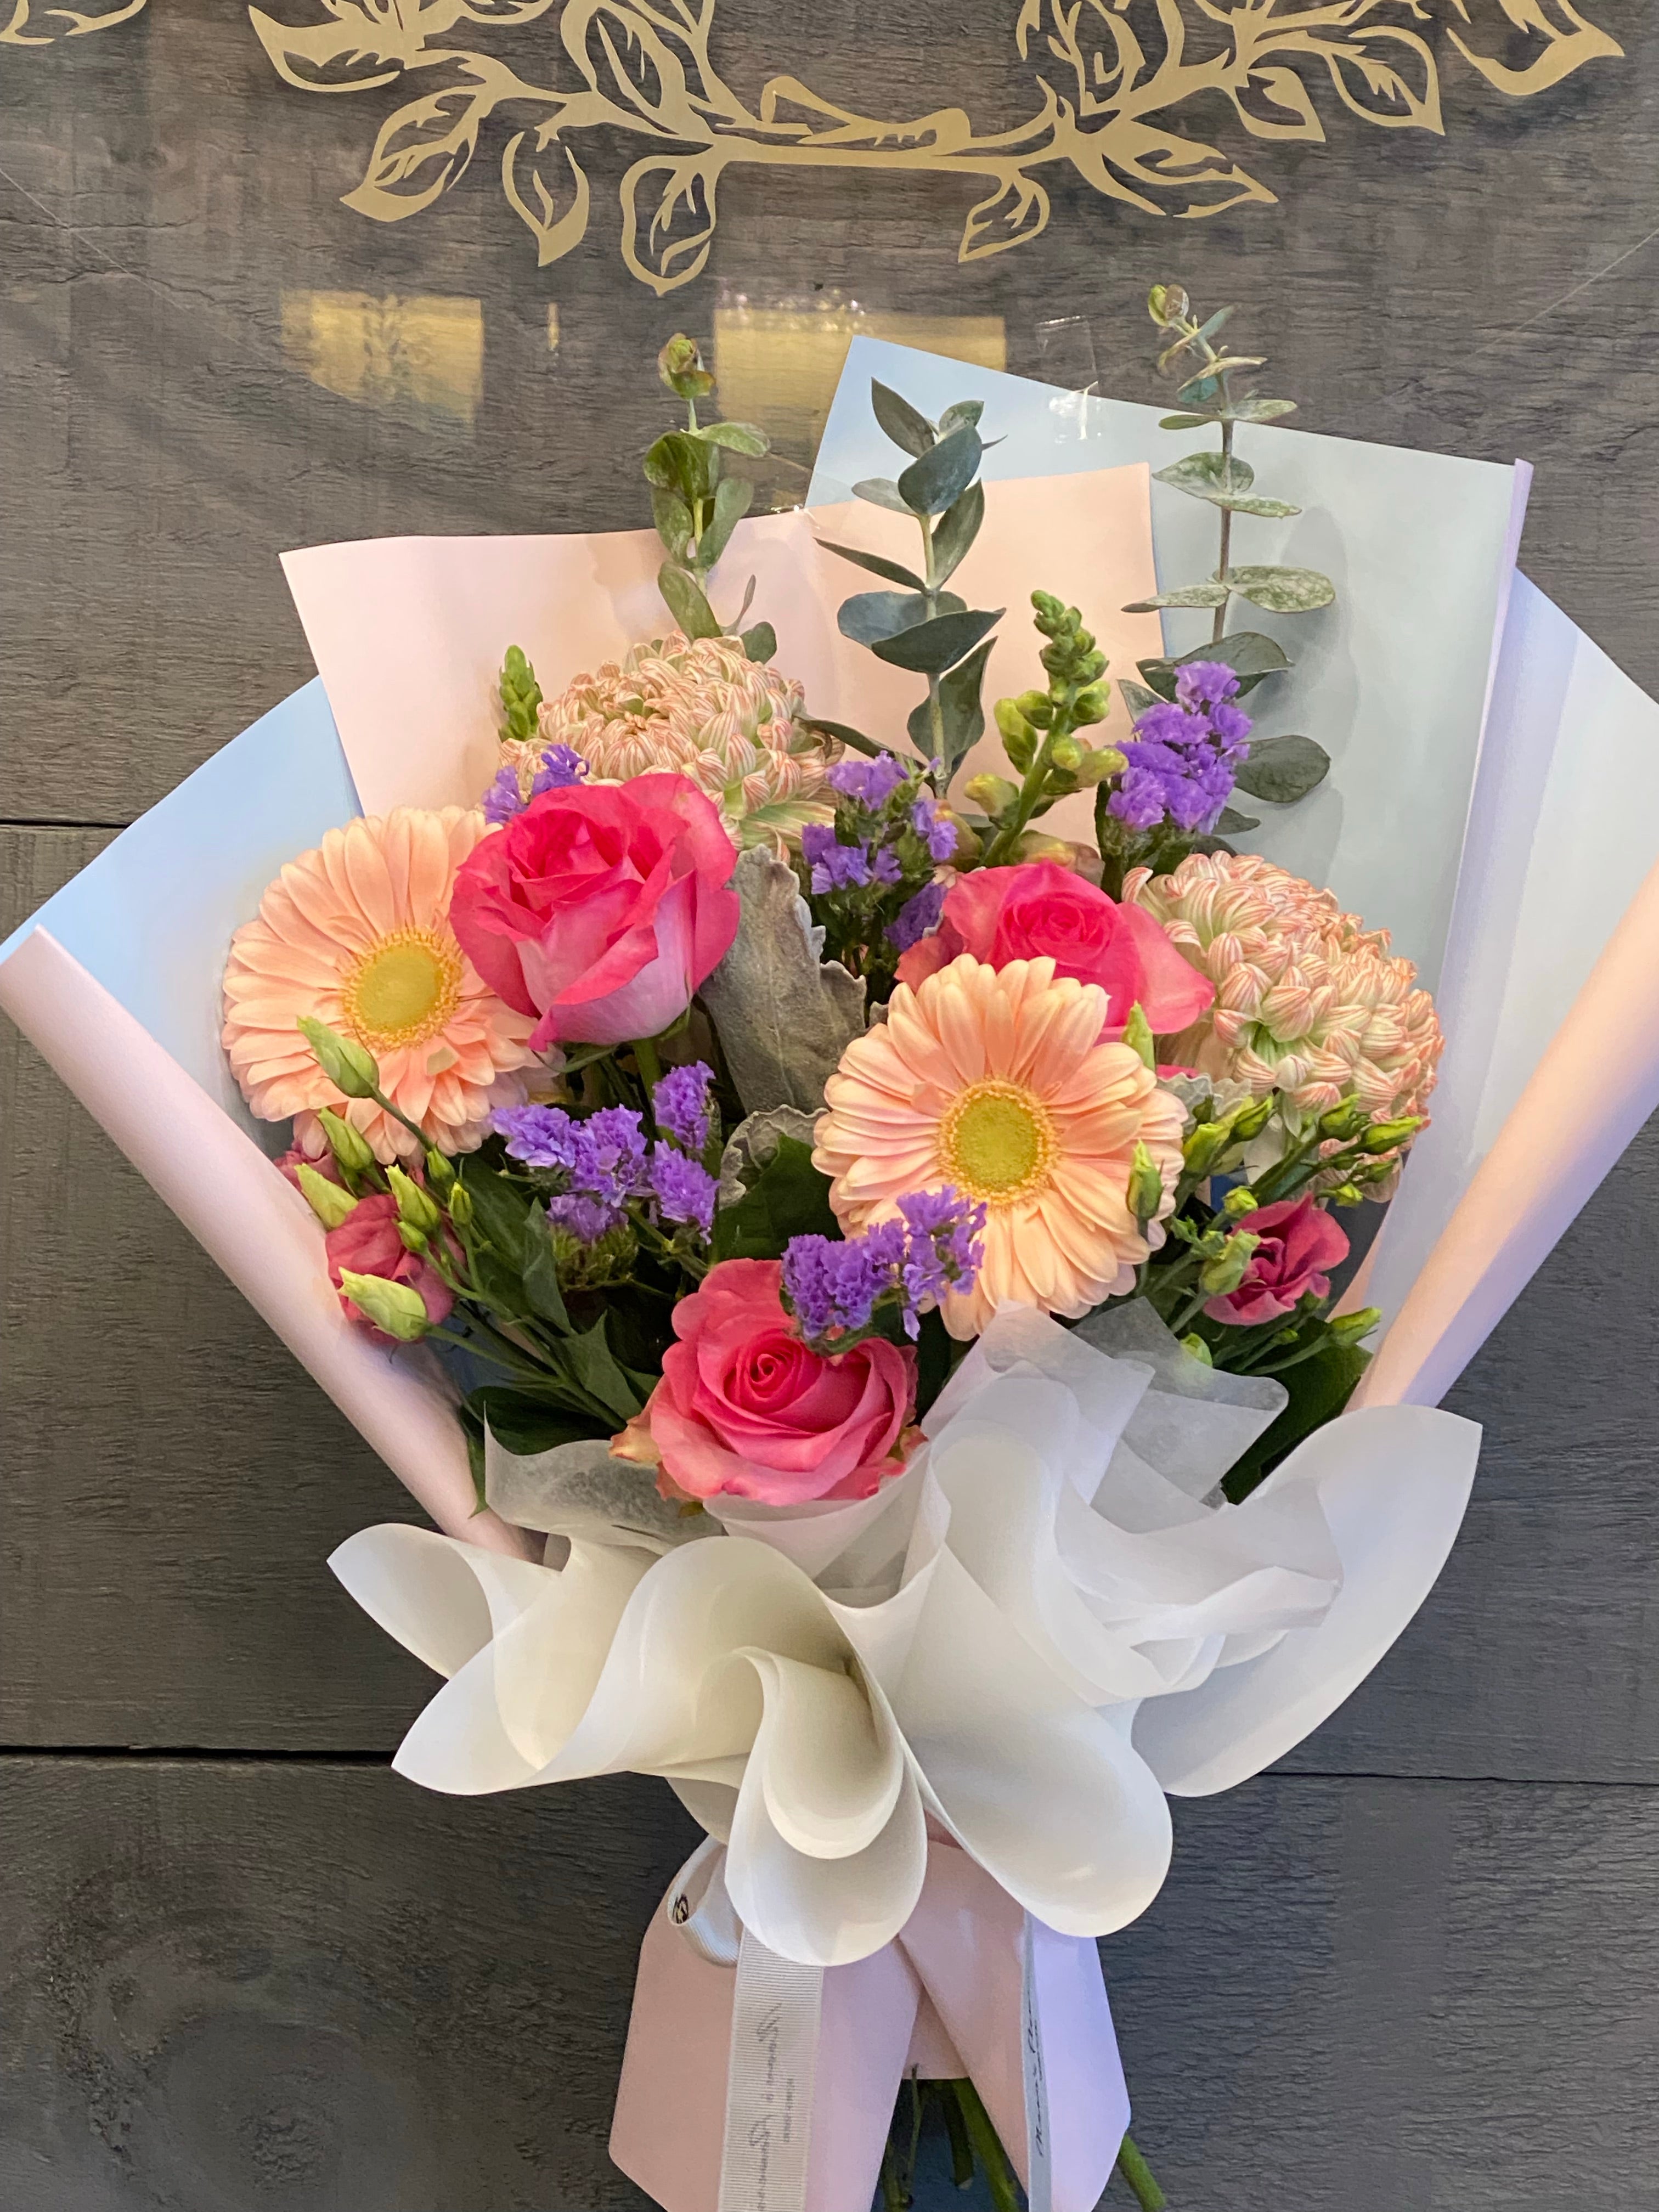 Buy Pastel Pastel Fresh Flower Bouquet Of The Month from the Next